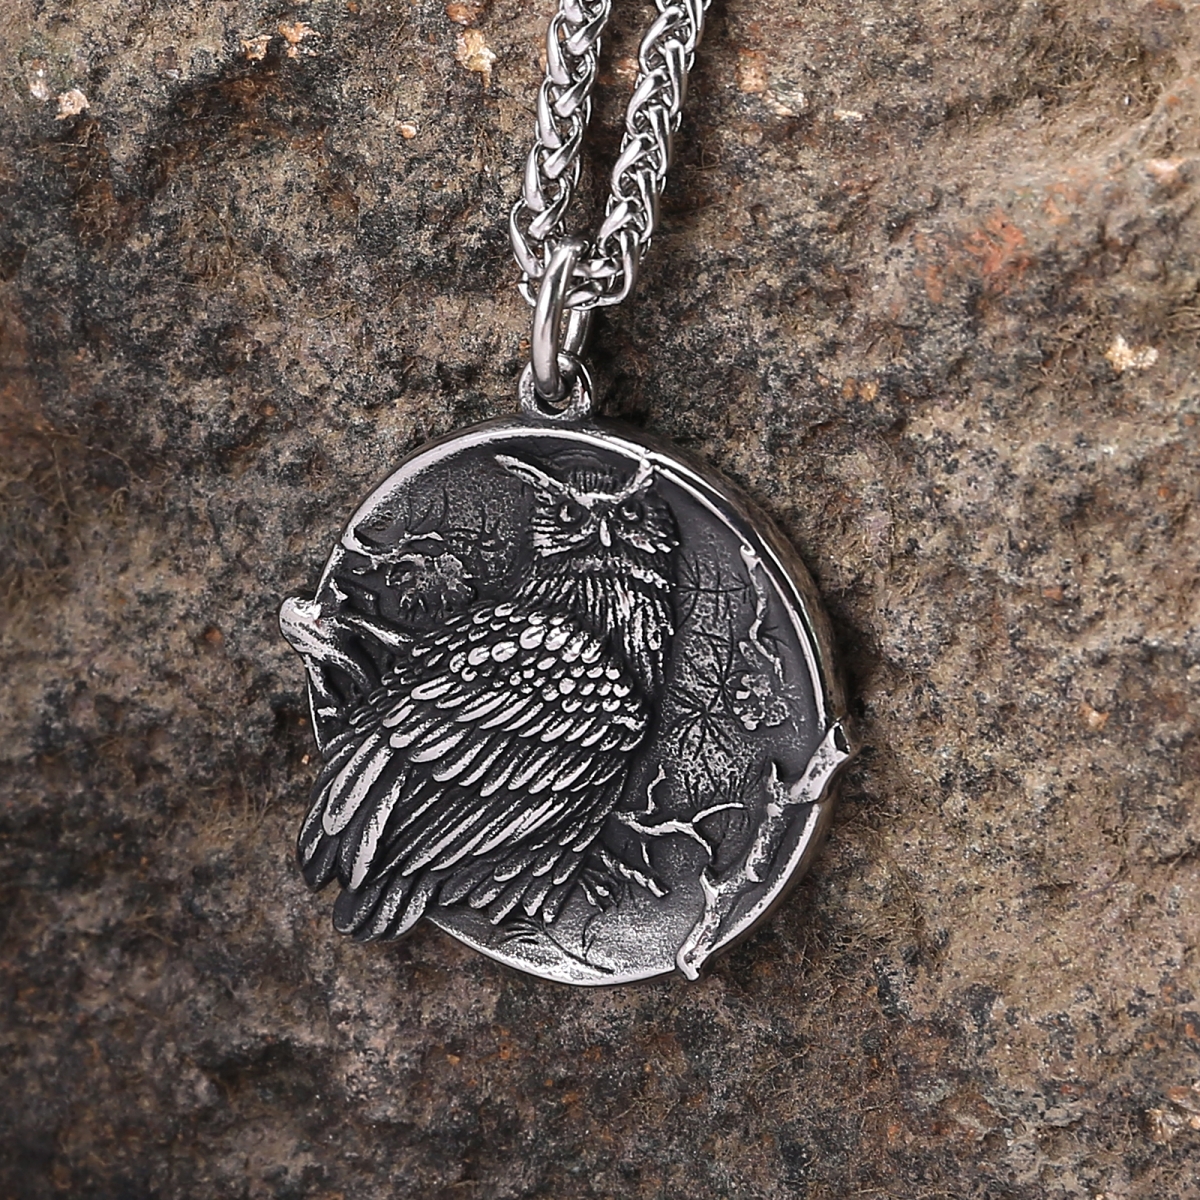 Owl Necklace US$3.2/PC-NORSECOLLECTION- Viking Jewelry,Viking Necklace,Viking Bracelet,Viking Rings,Viking Mugs,Viking Accessories,Viking Crafts